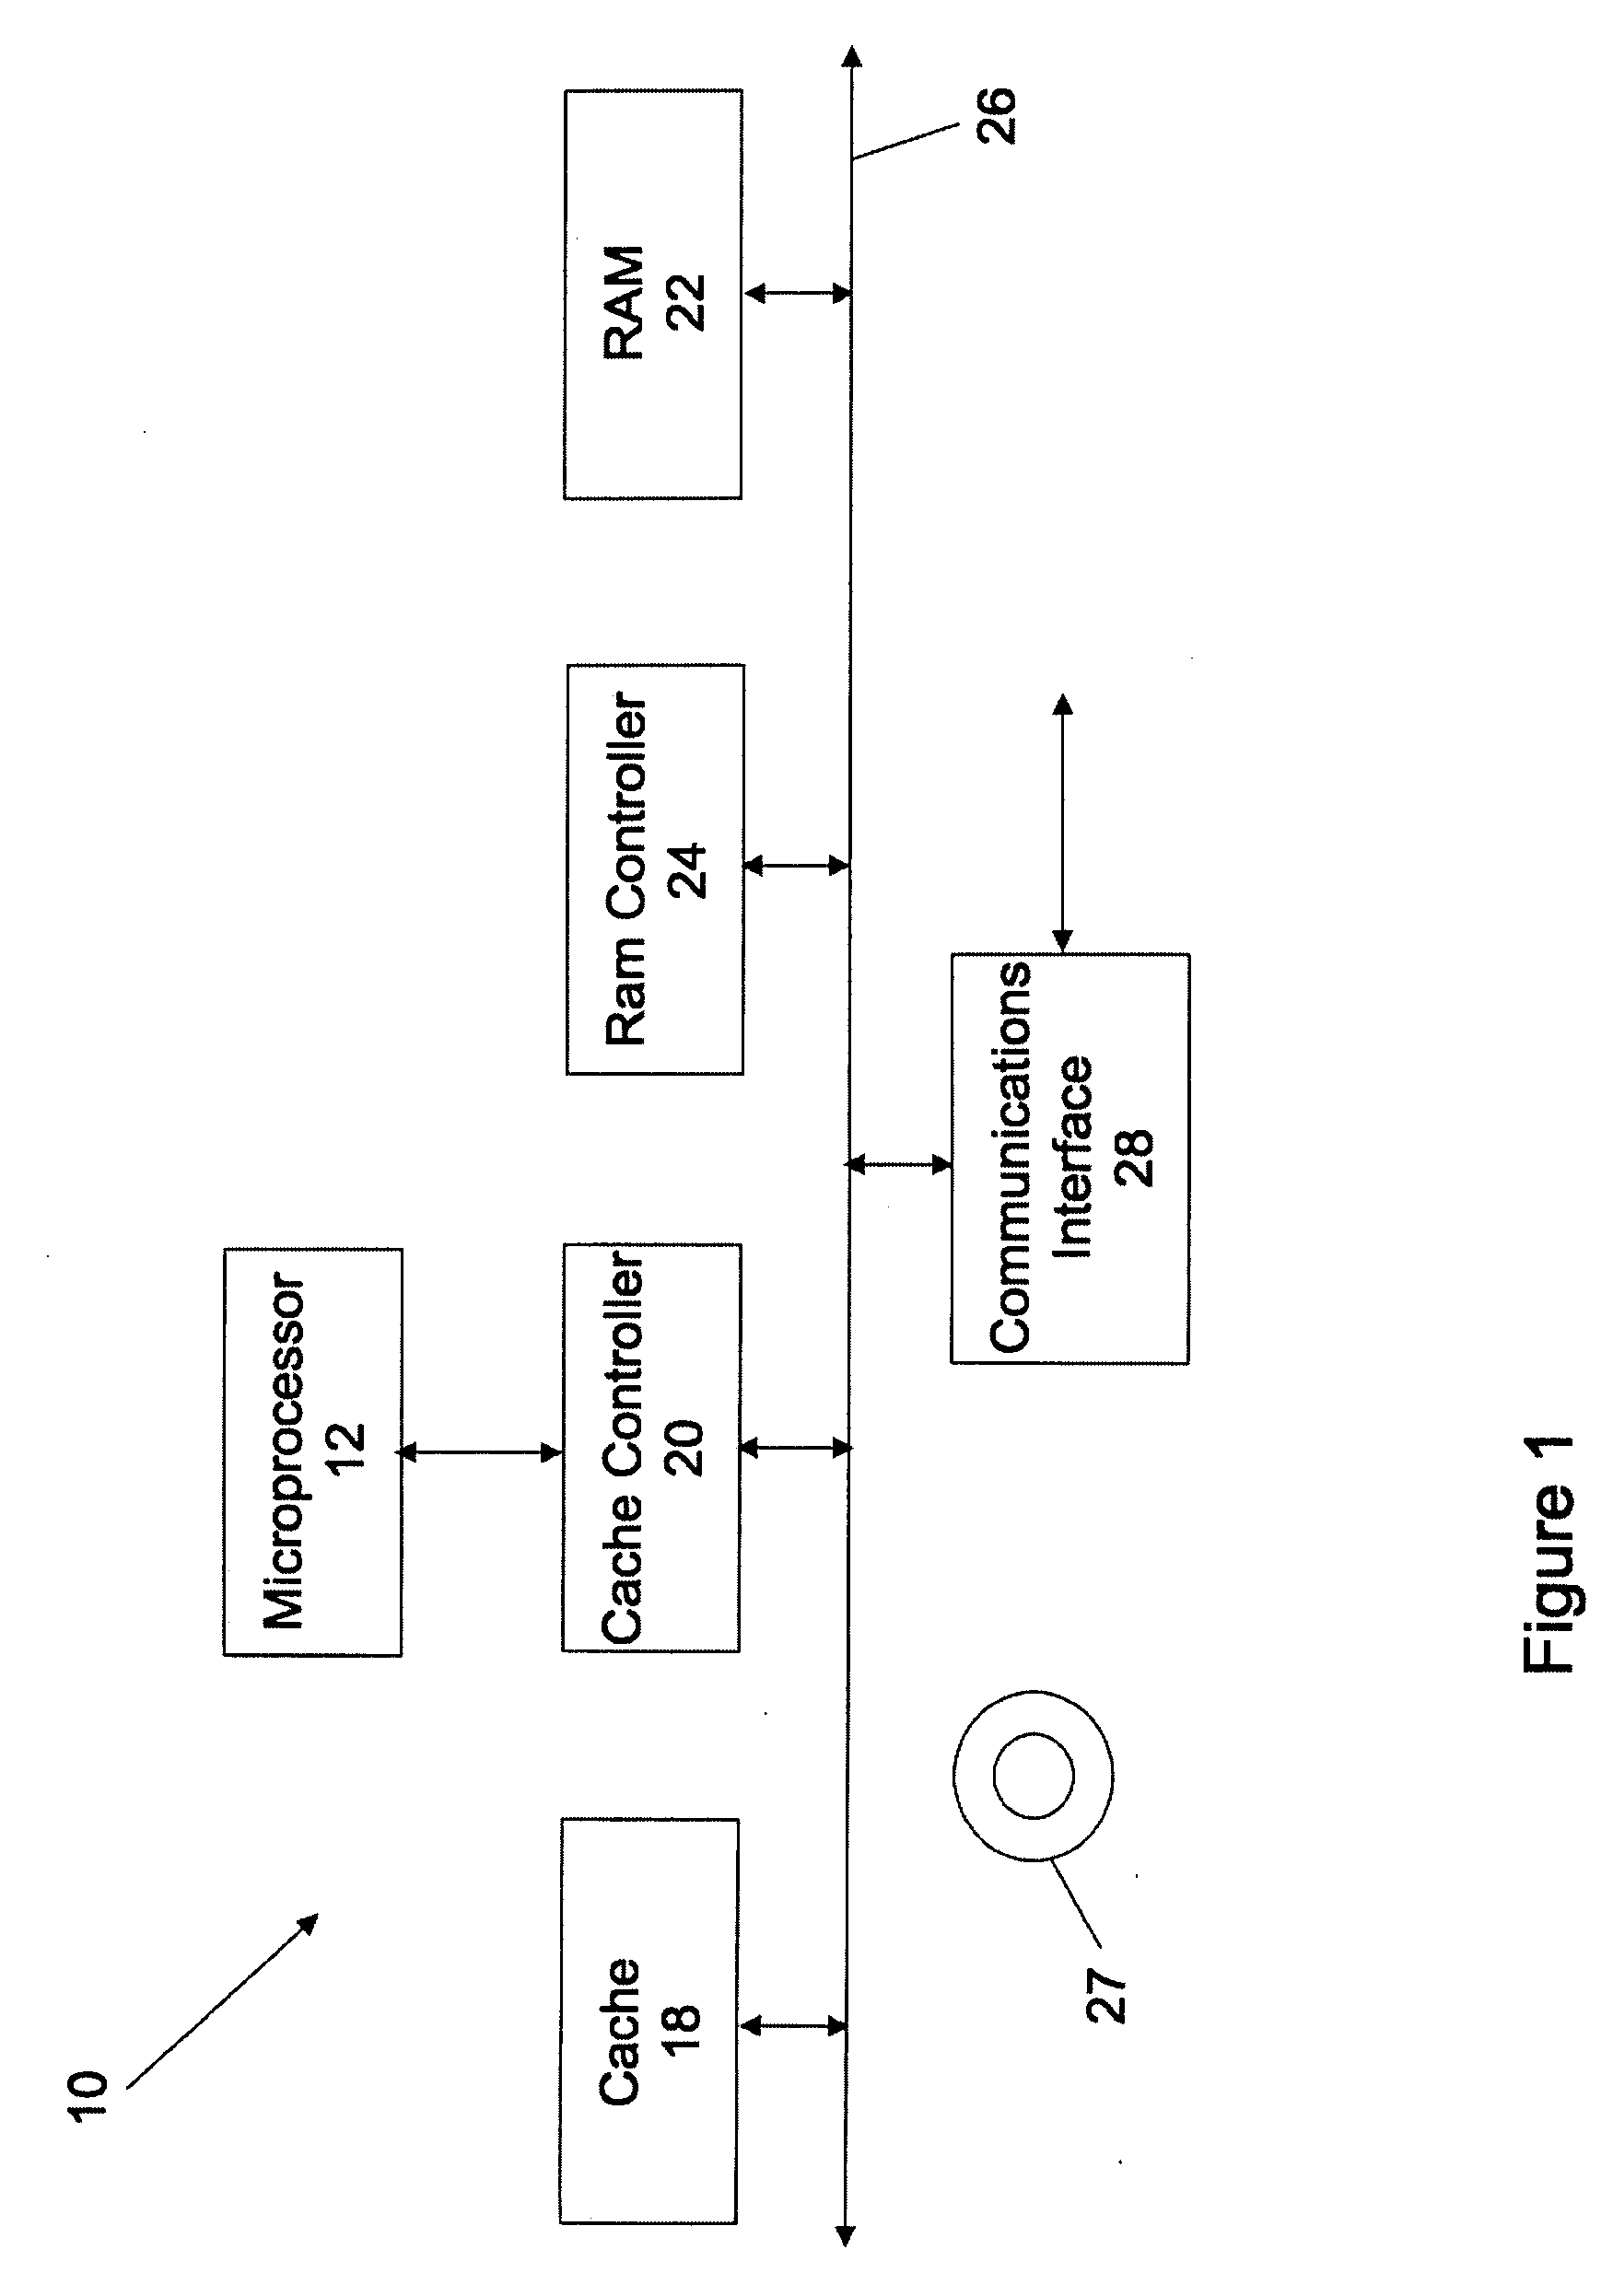 Method and system for dynamic loop transfer by populating split variables